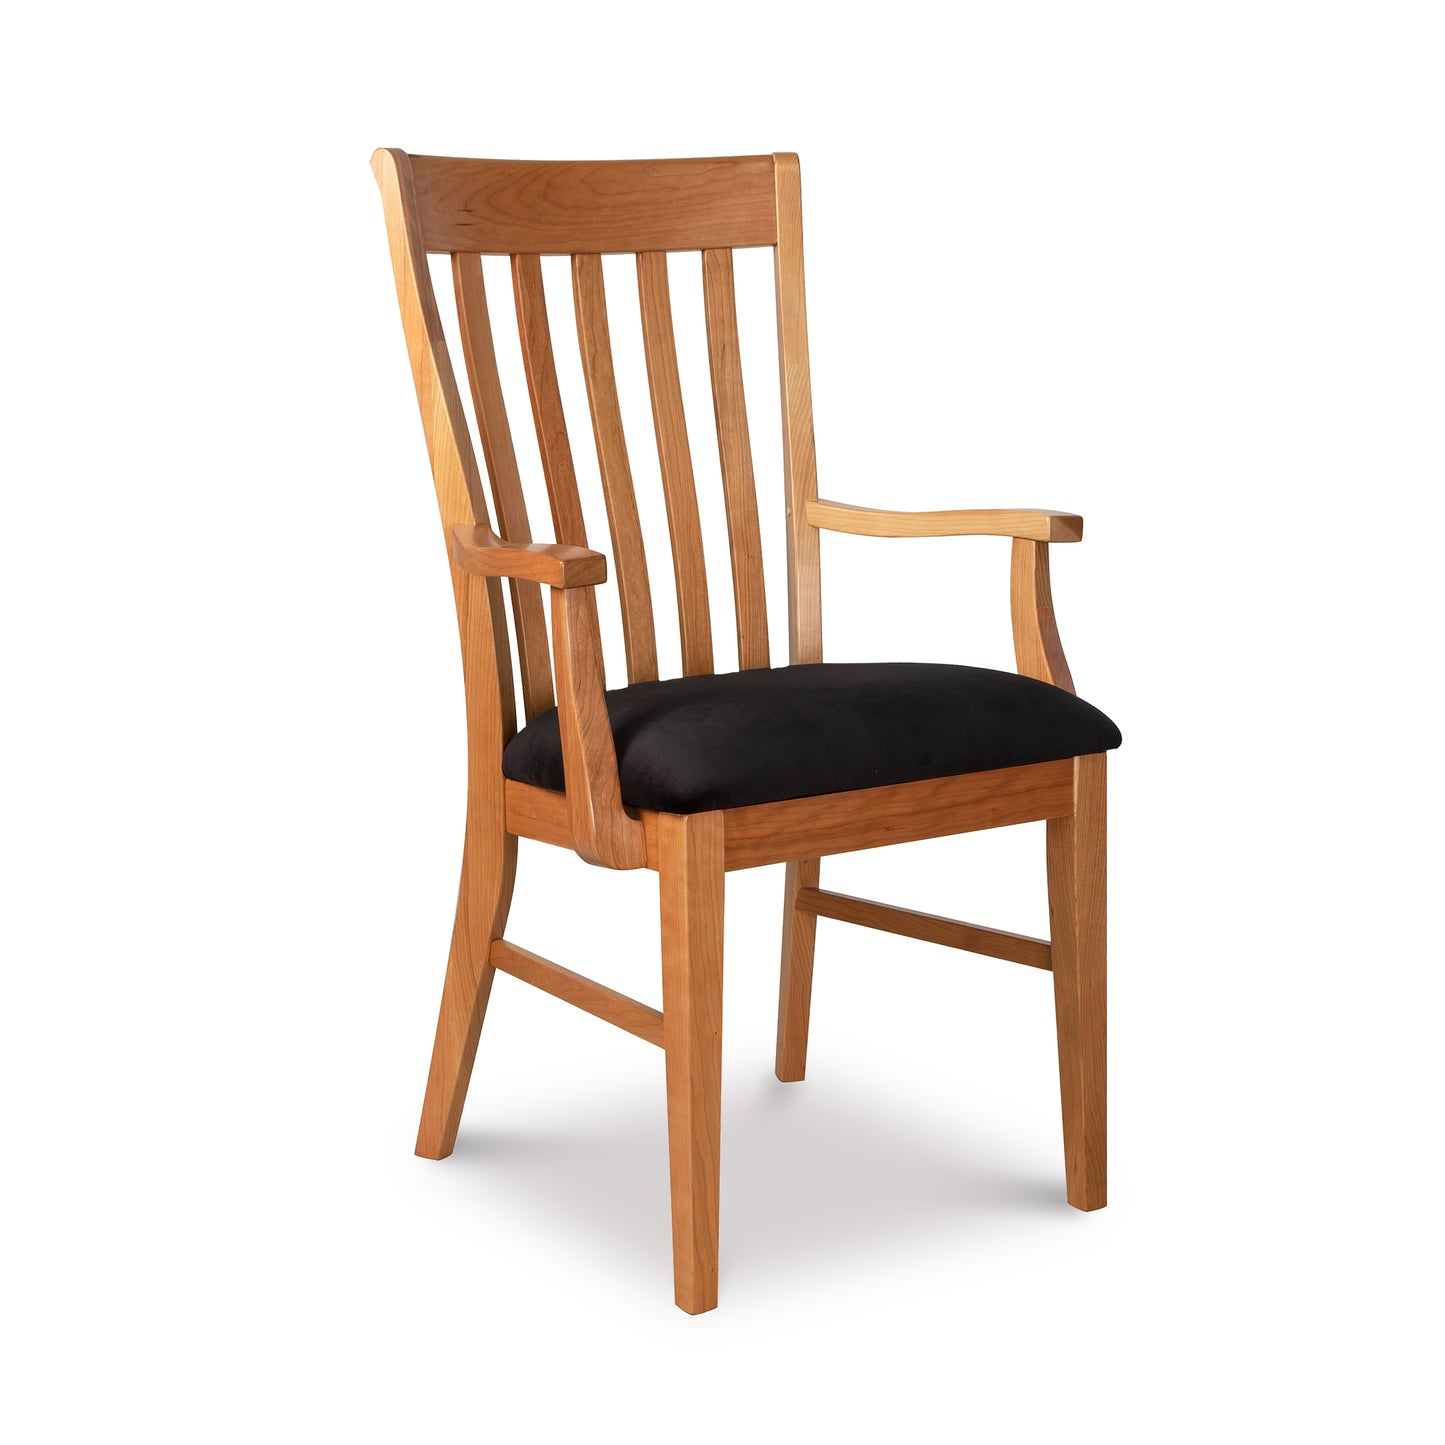 A Vermont Woods Studios Country Shaker Chair, featuring a vertical slat back design and a black cushioned seat, isolated on a white background.